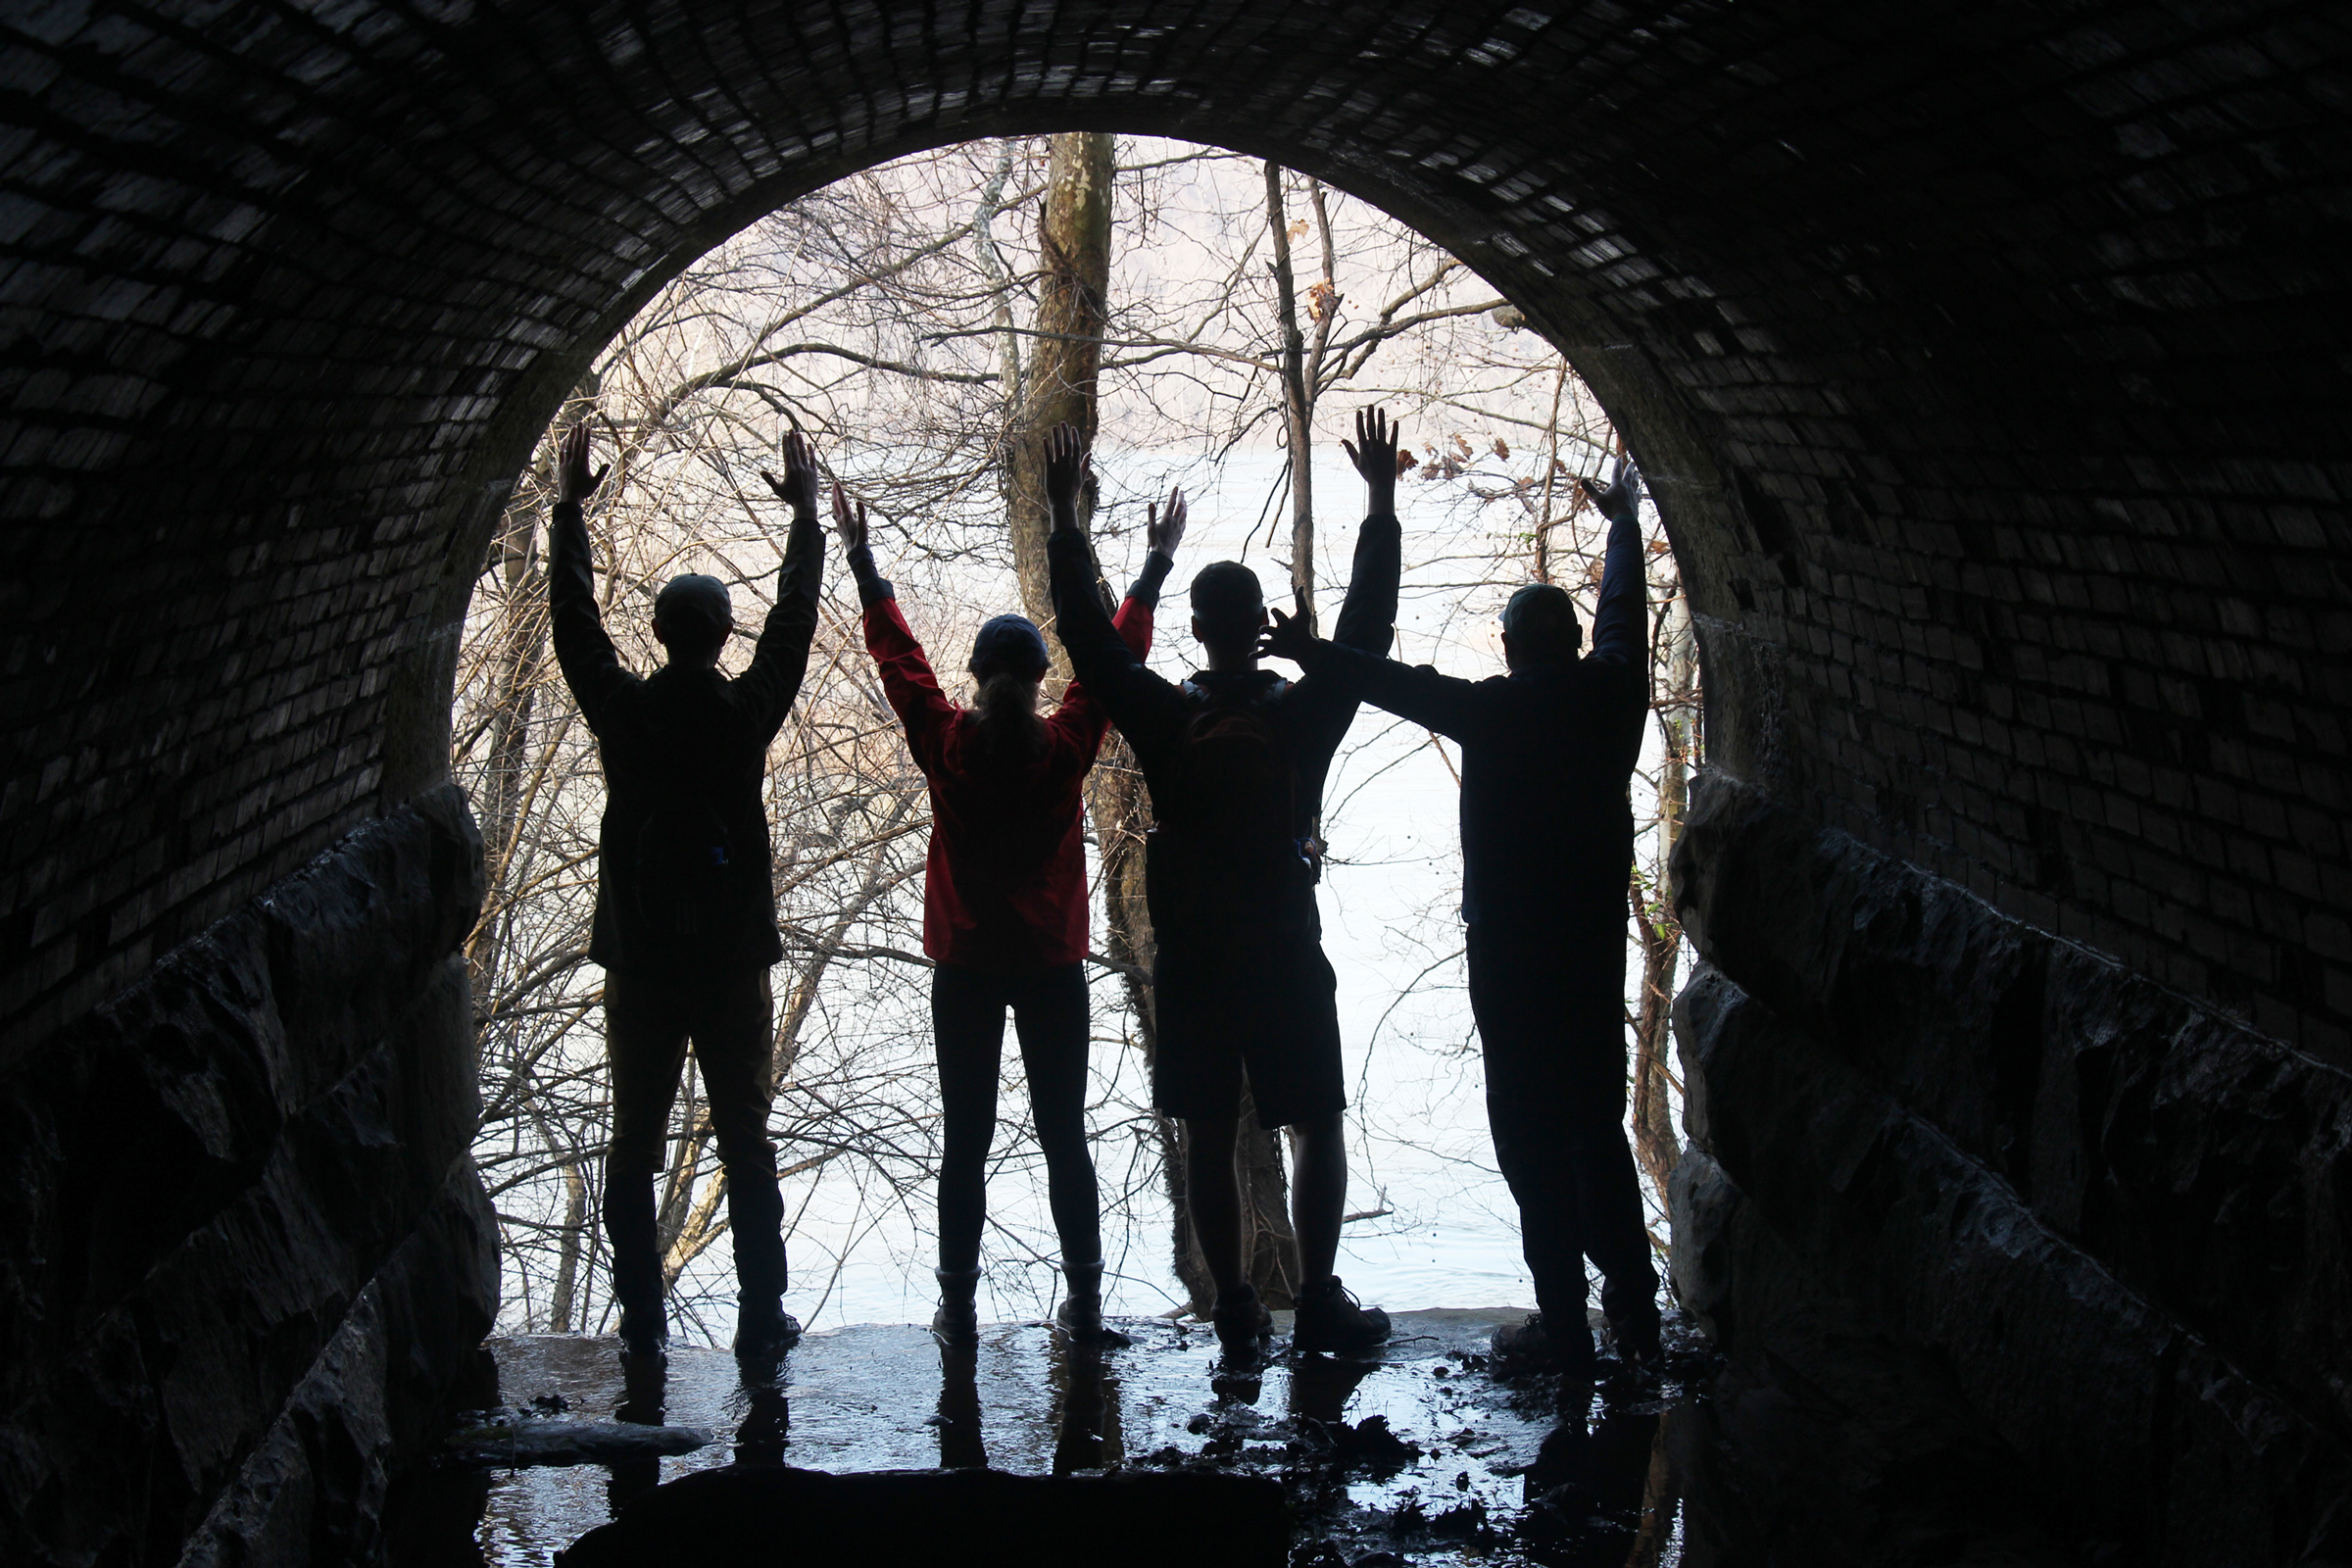 hikers silhouette photo in tunnel